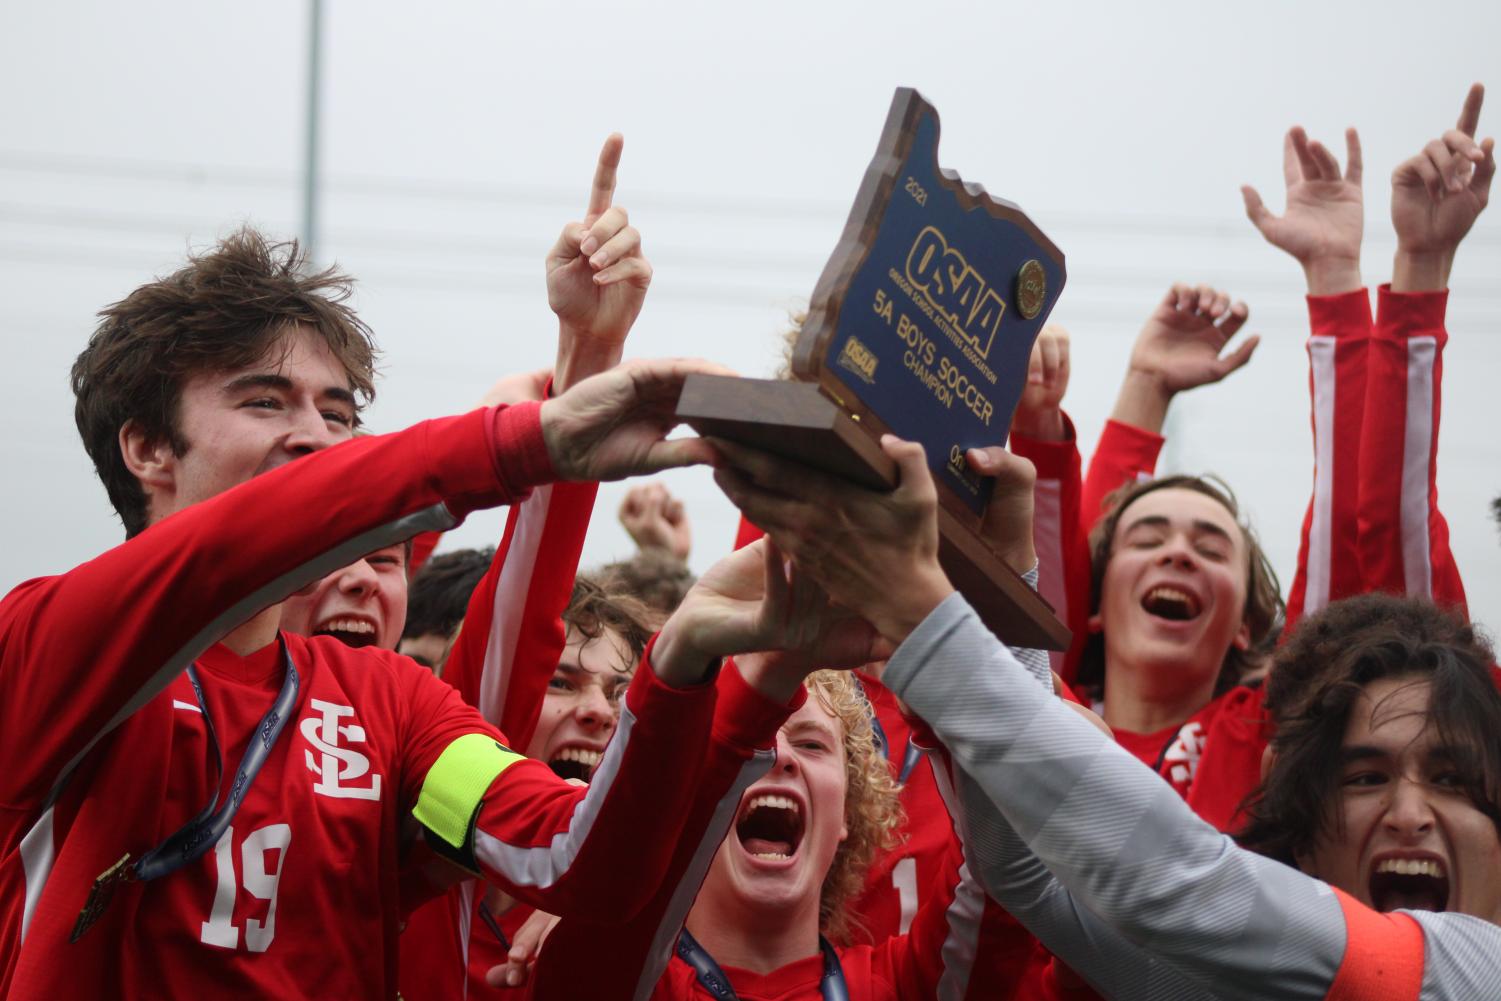 The+Streak+Continues%3A+Boys+Soccer+Wins+State+Title+for+the+Second+Time+in+a+Row